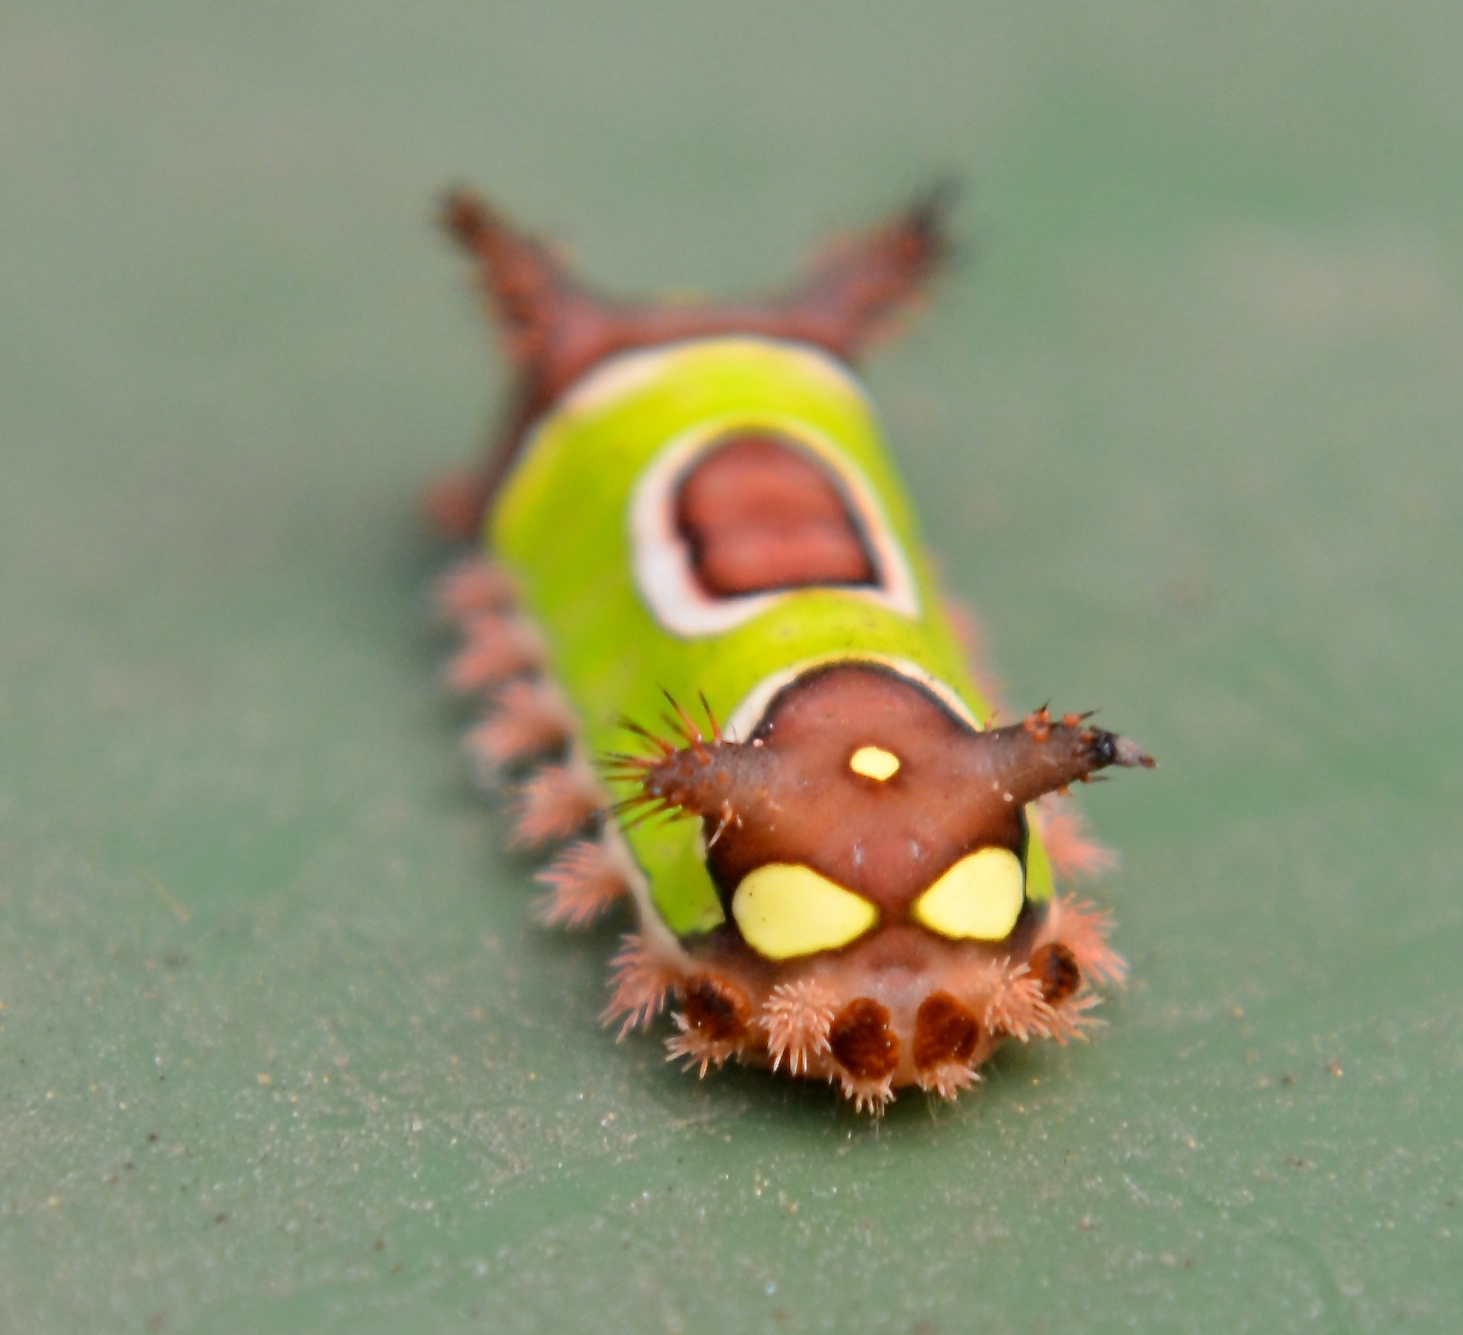 The rear end of the Saddleback Slug caterpillar has two spots that look like eyes. This an example of the startle display used to ward off predators